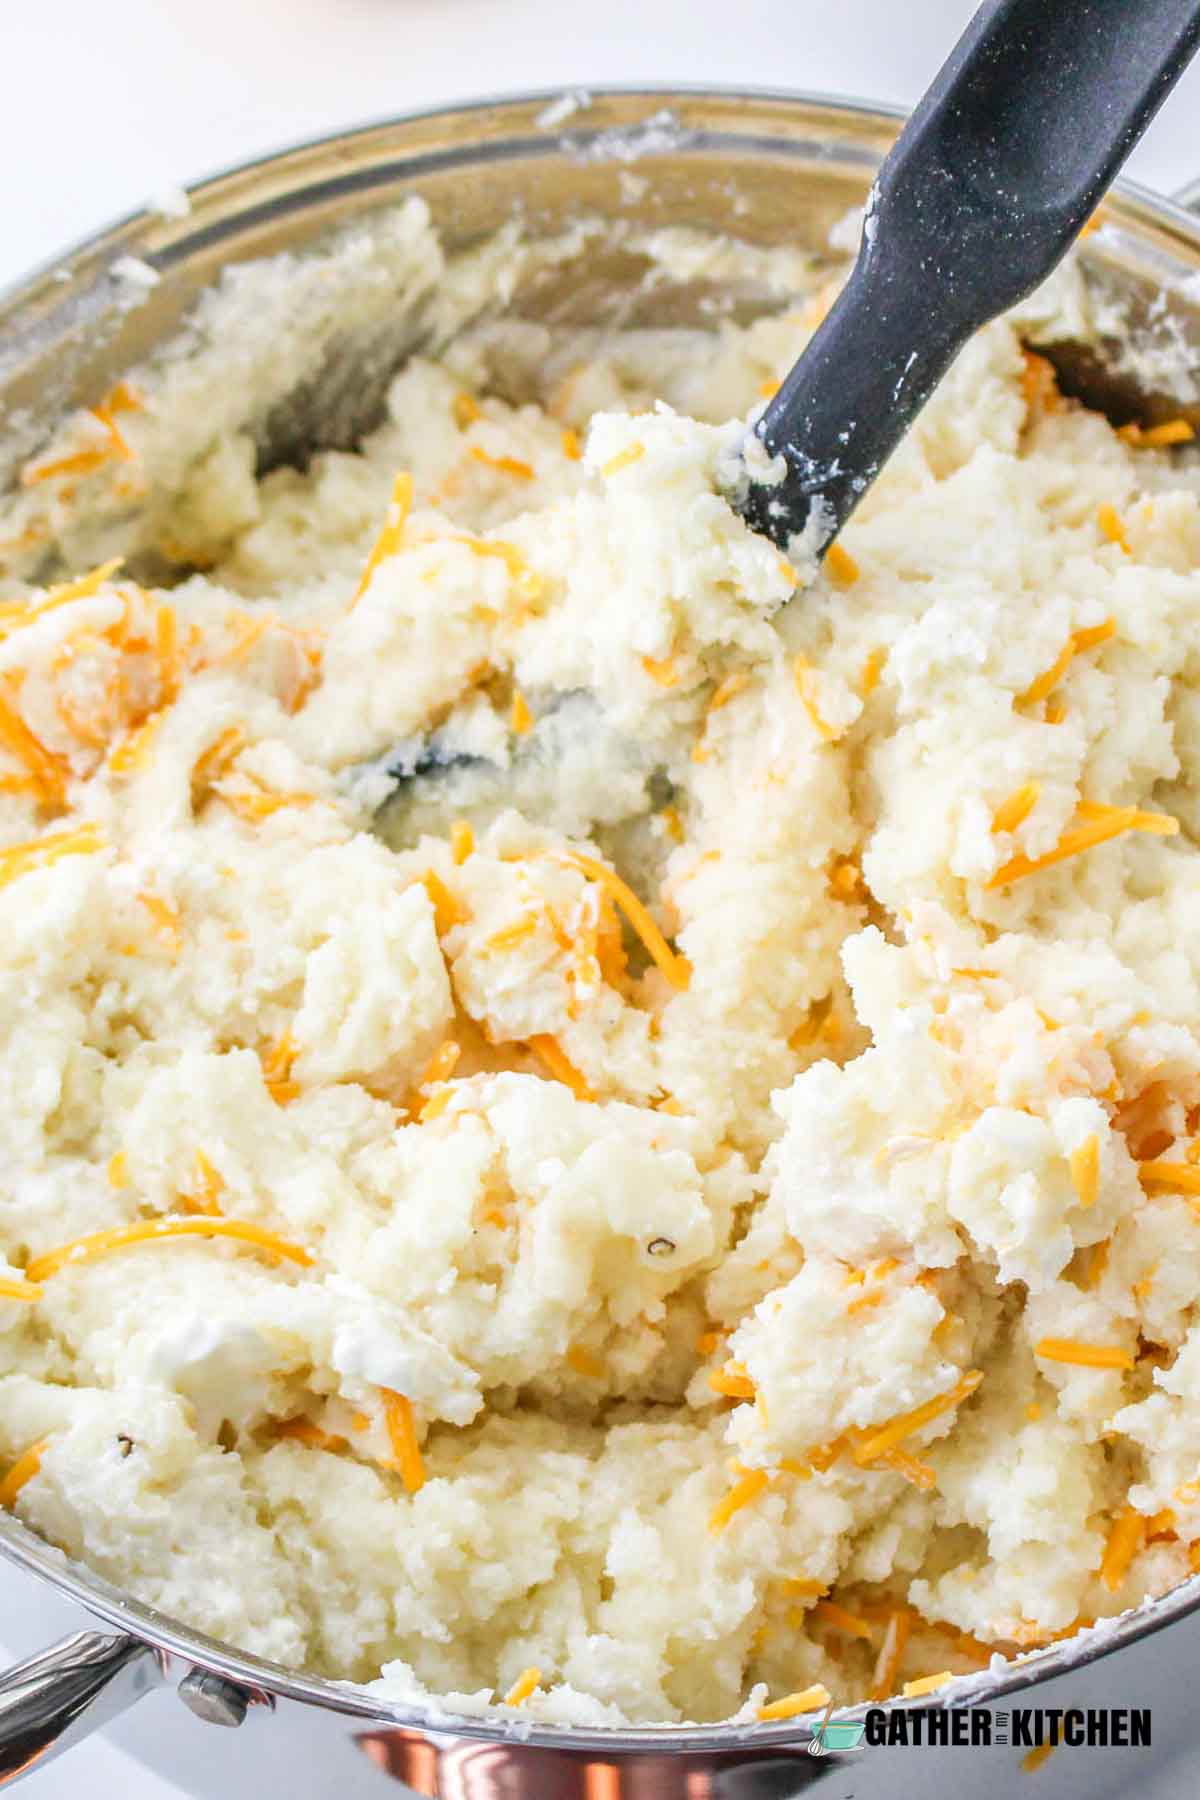 Cheddar cheese mixed with mashed potatoes.